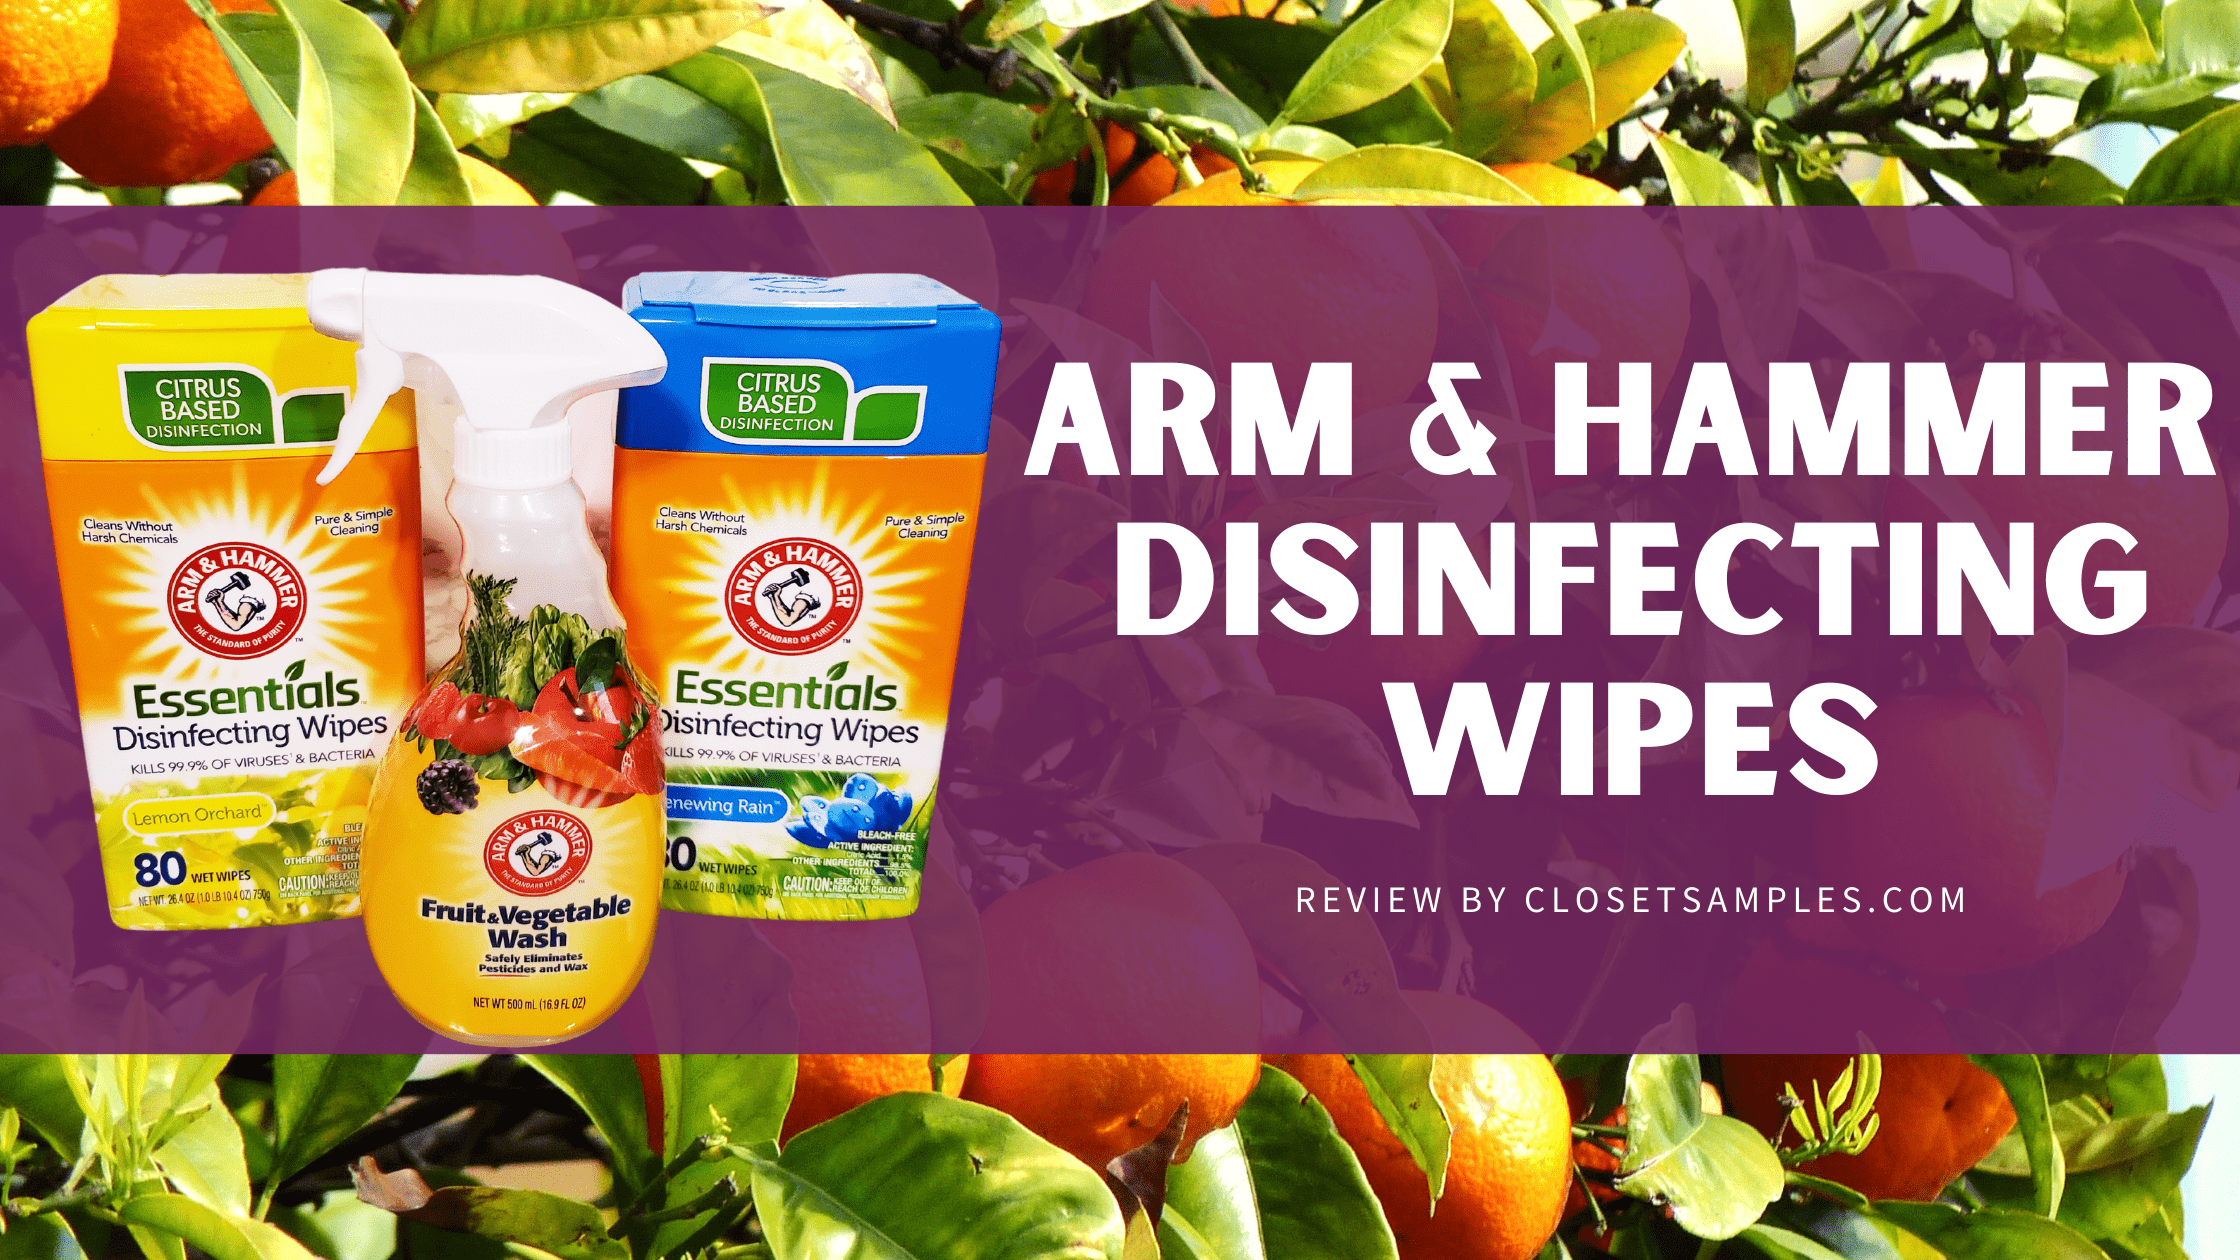 I-tried-the-NEW-Arm-and-Hammer-Disinfecting-Wipes-review-closetsamples.png